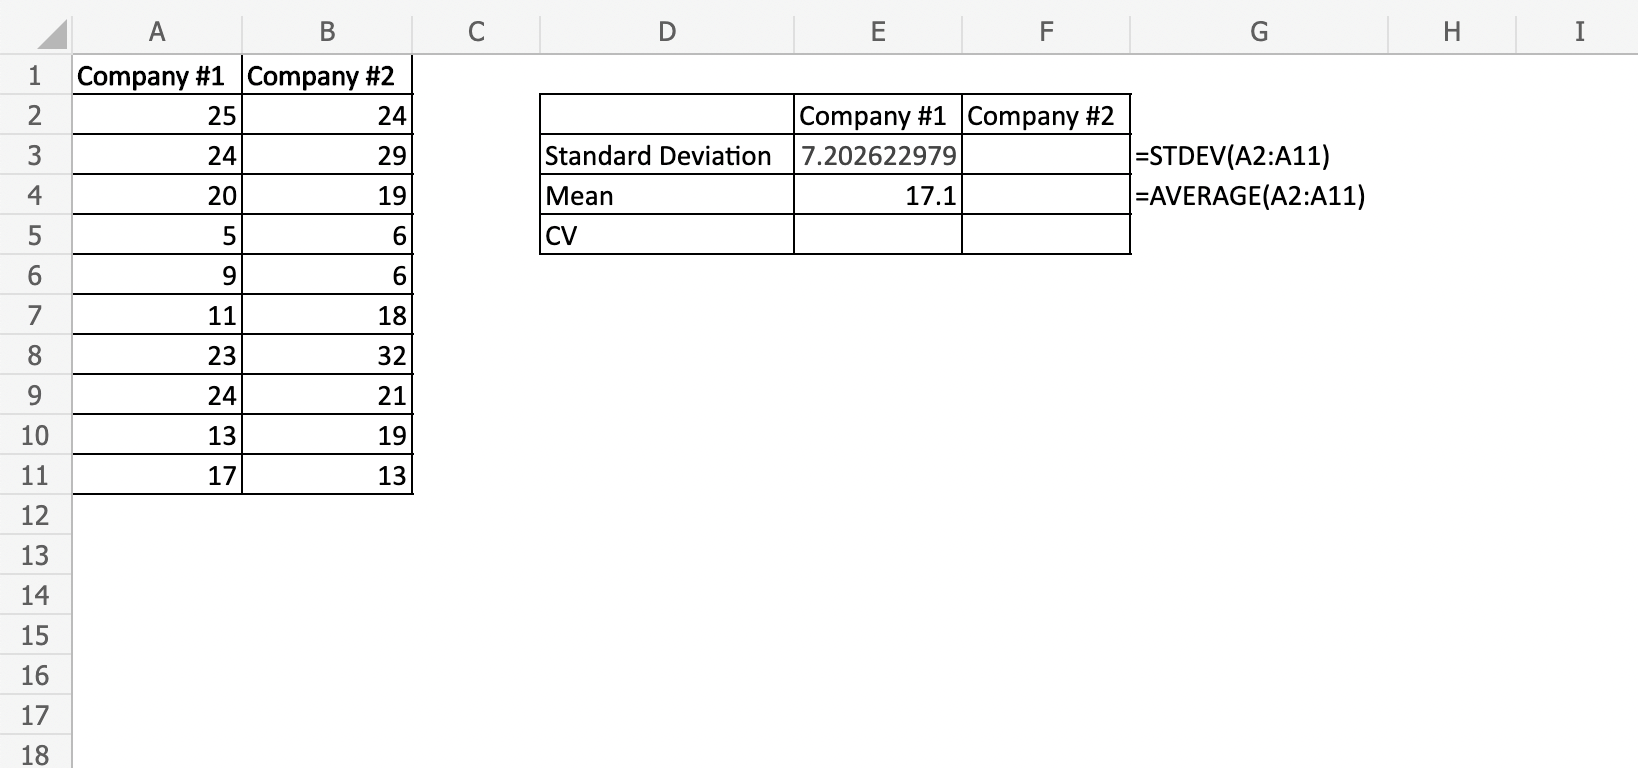 Calculating the Standard Deviation and the Average of a column